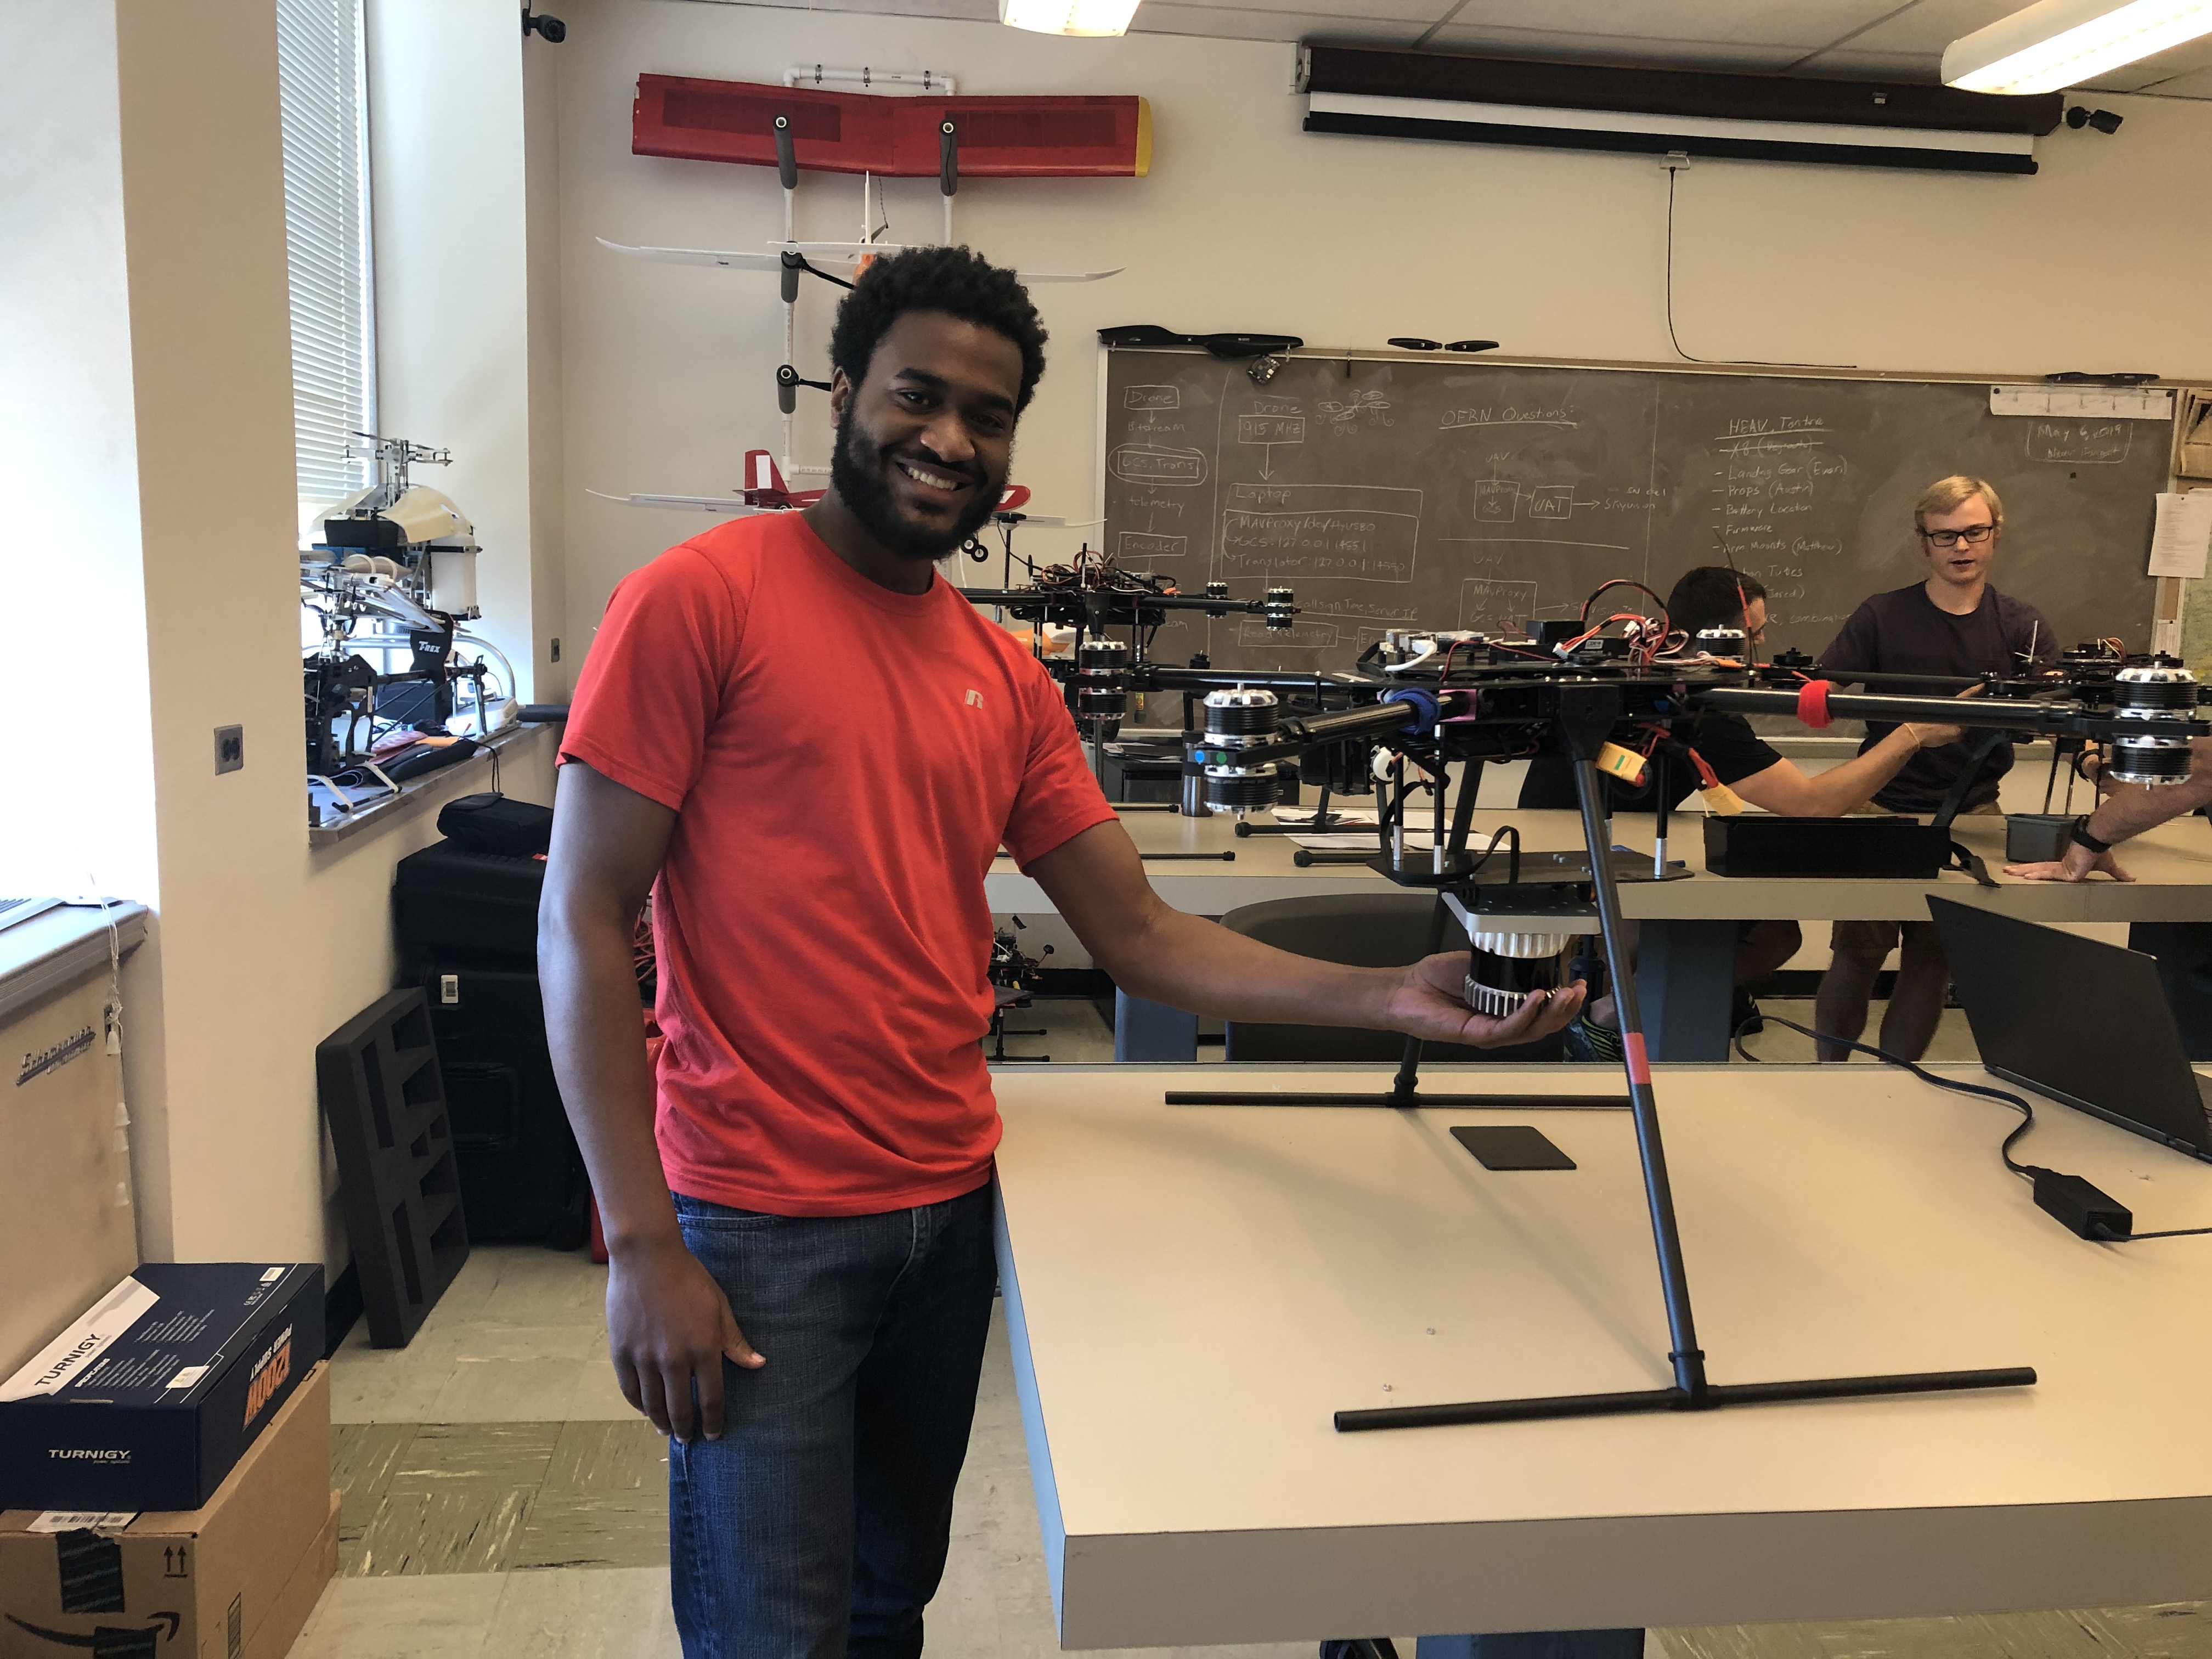 Matthew Terry in the UAV Master Lab in 2019. Provided by Kelly Cohen